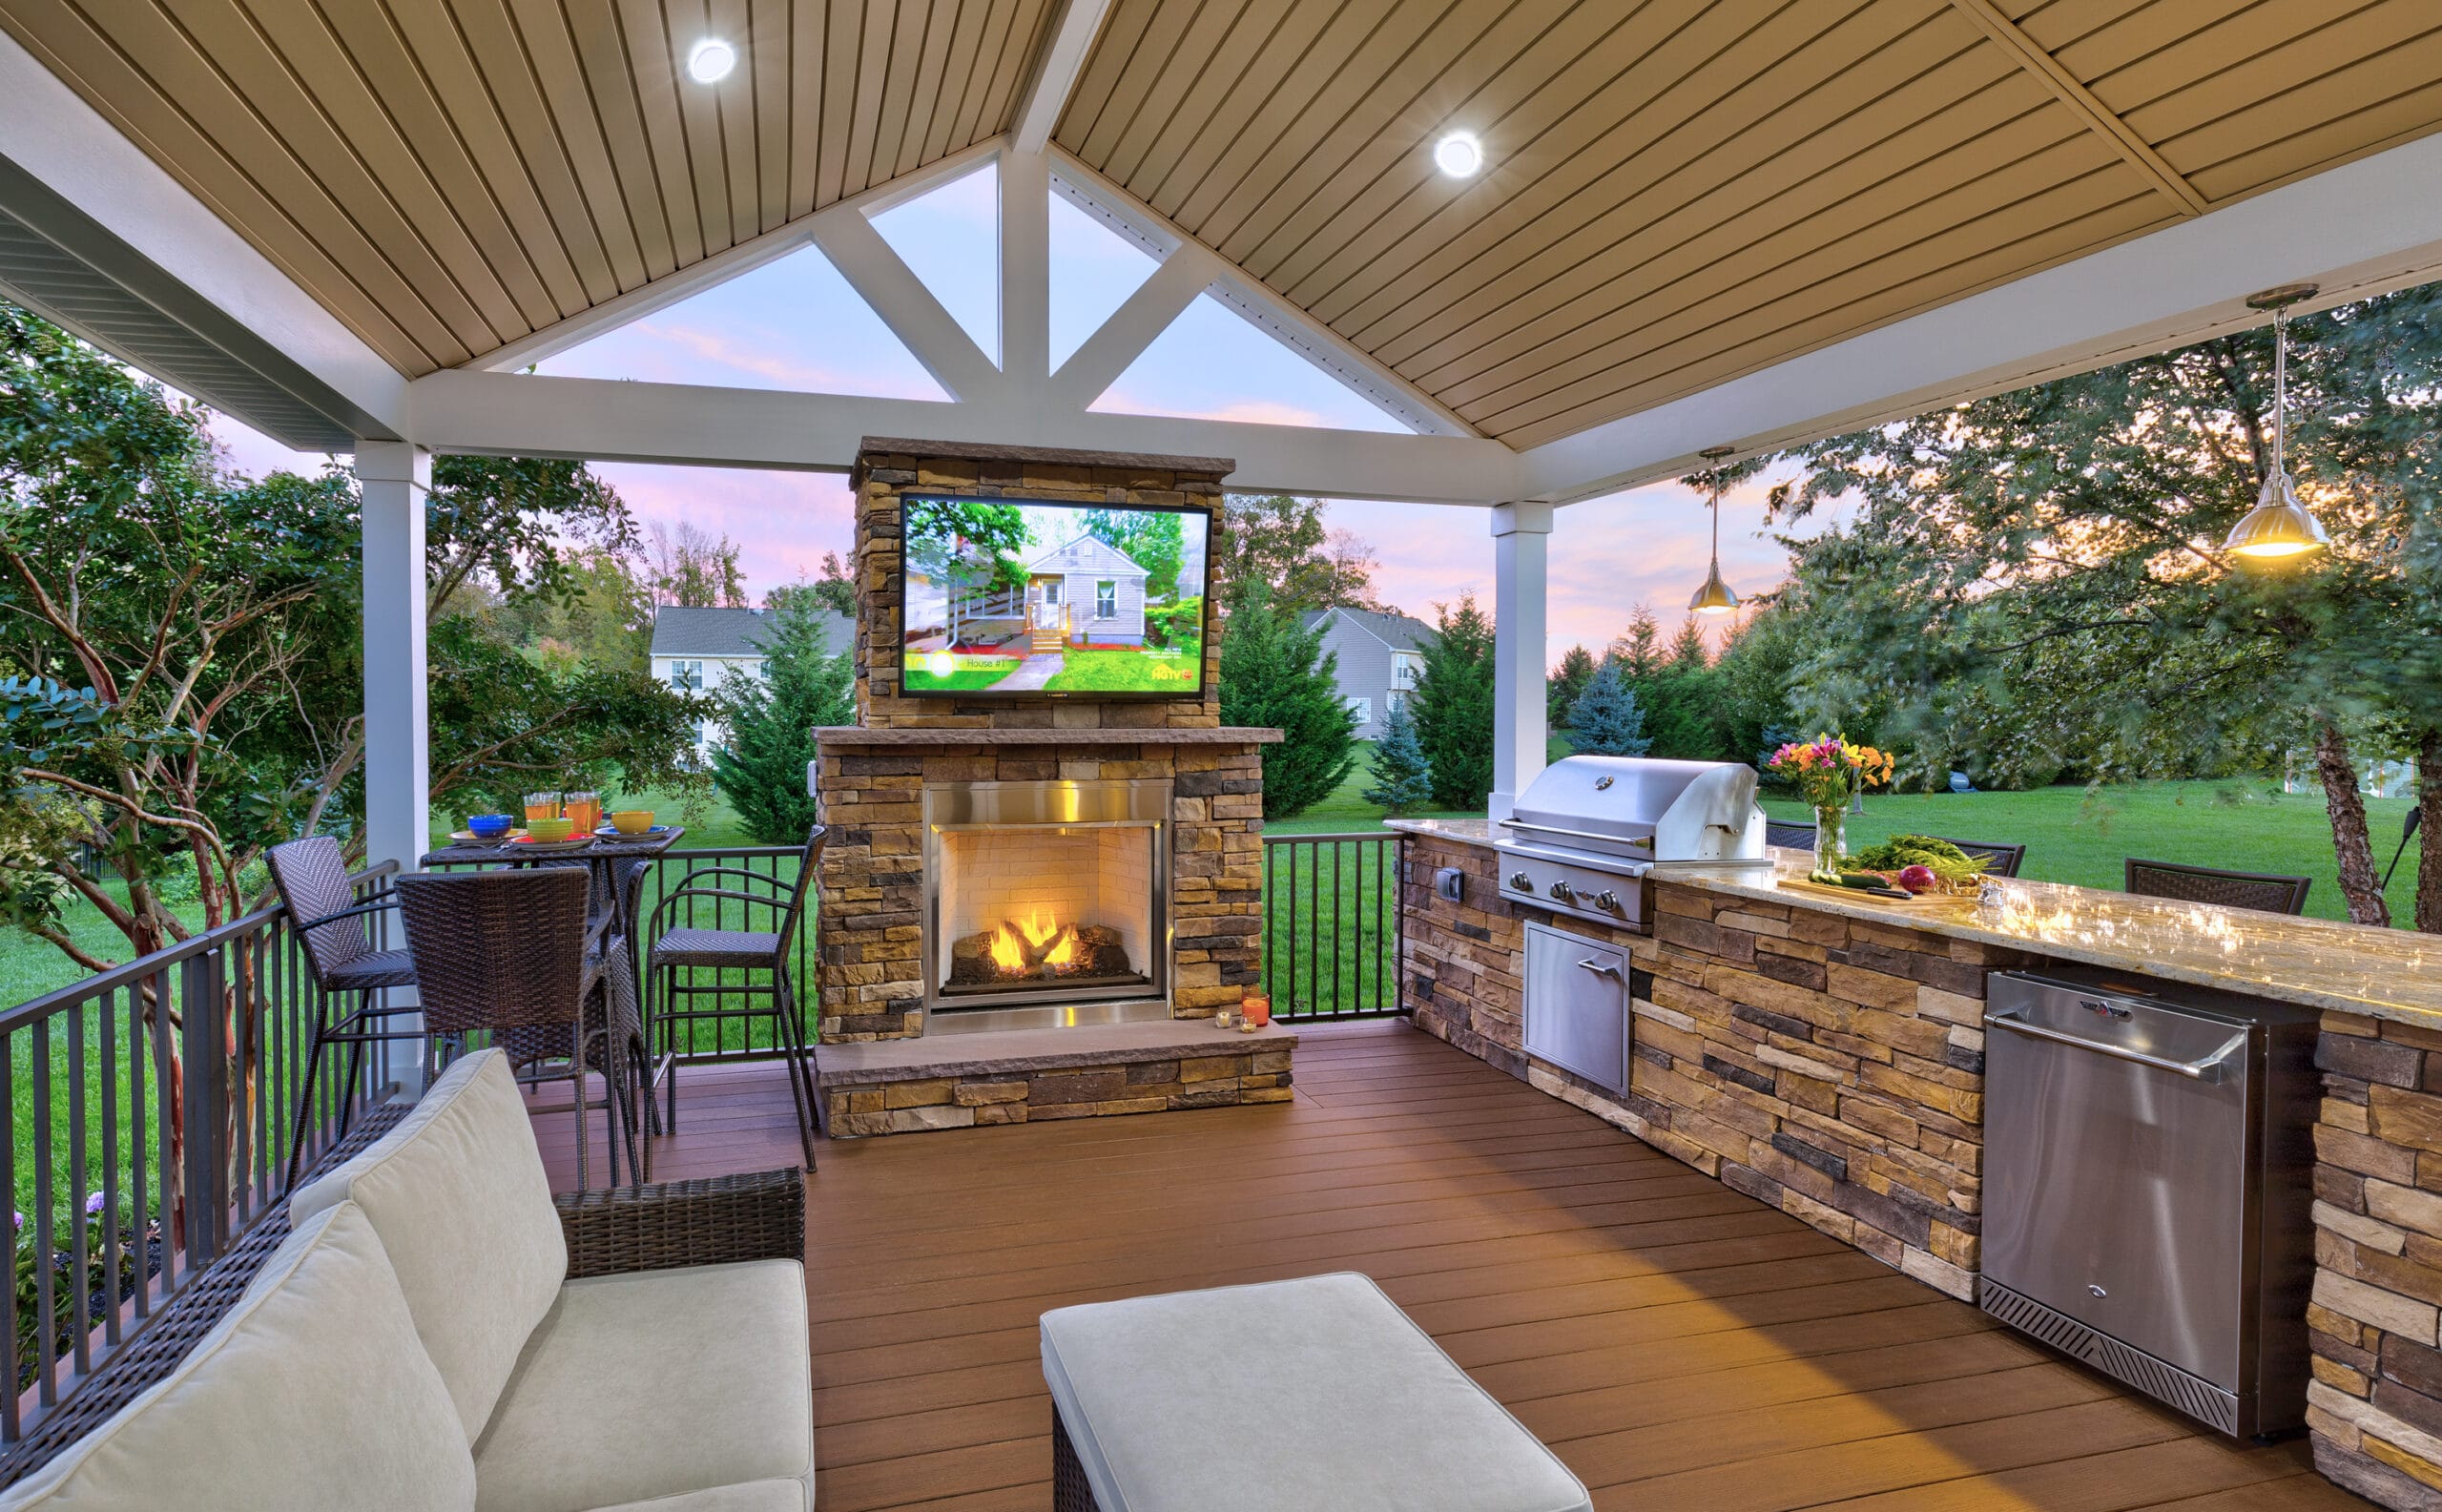 Luxury outdoor space equipped with appliances, sofa, television, and fireplace.